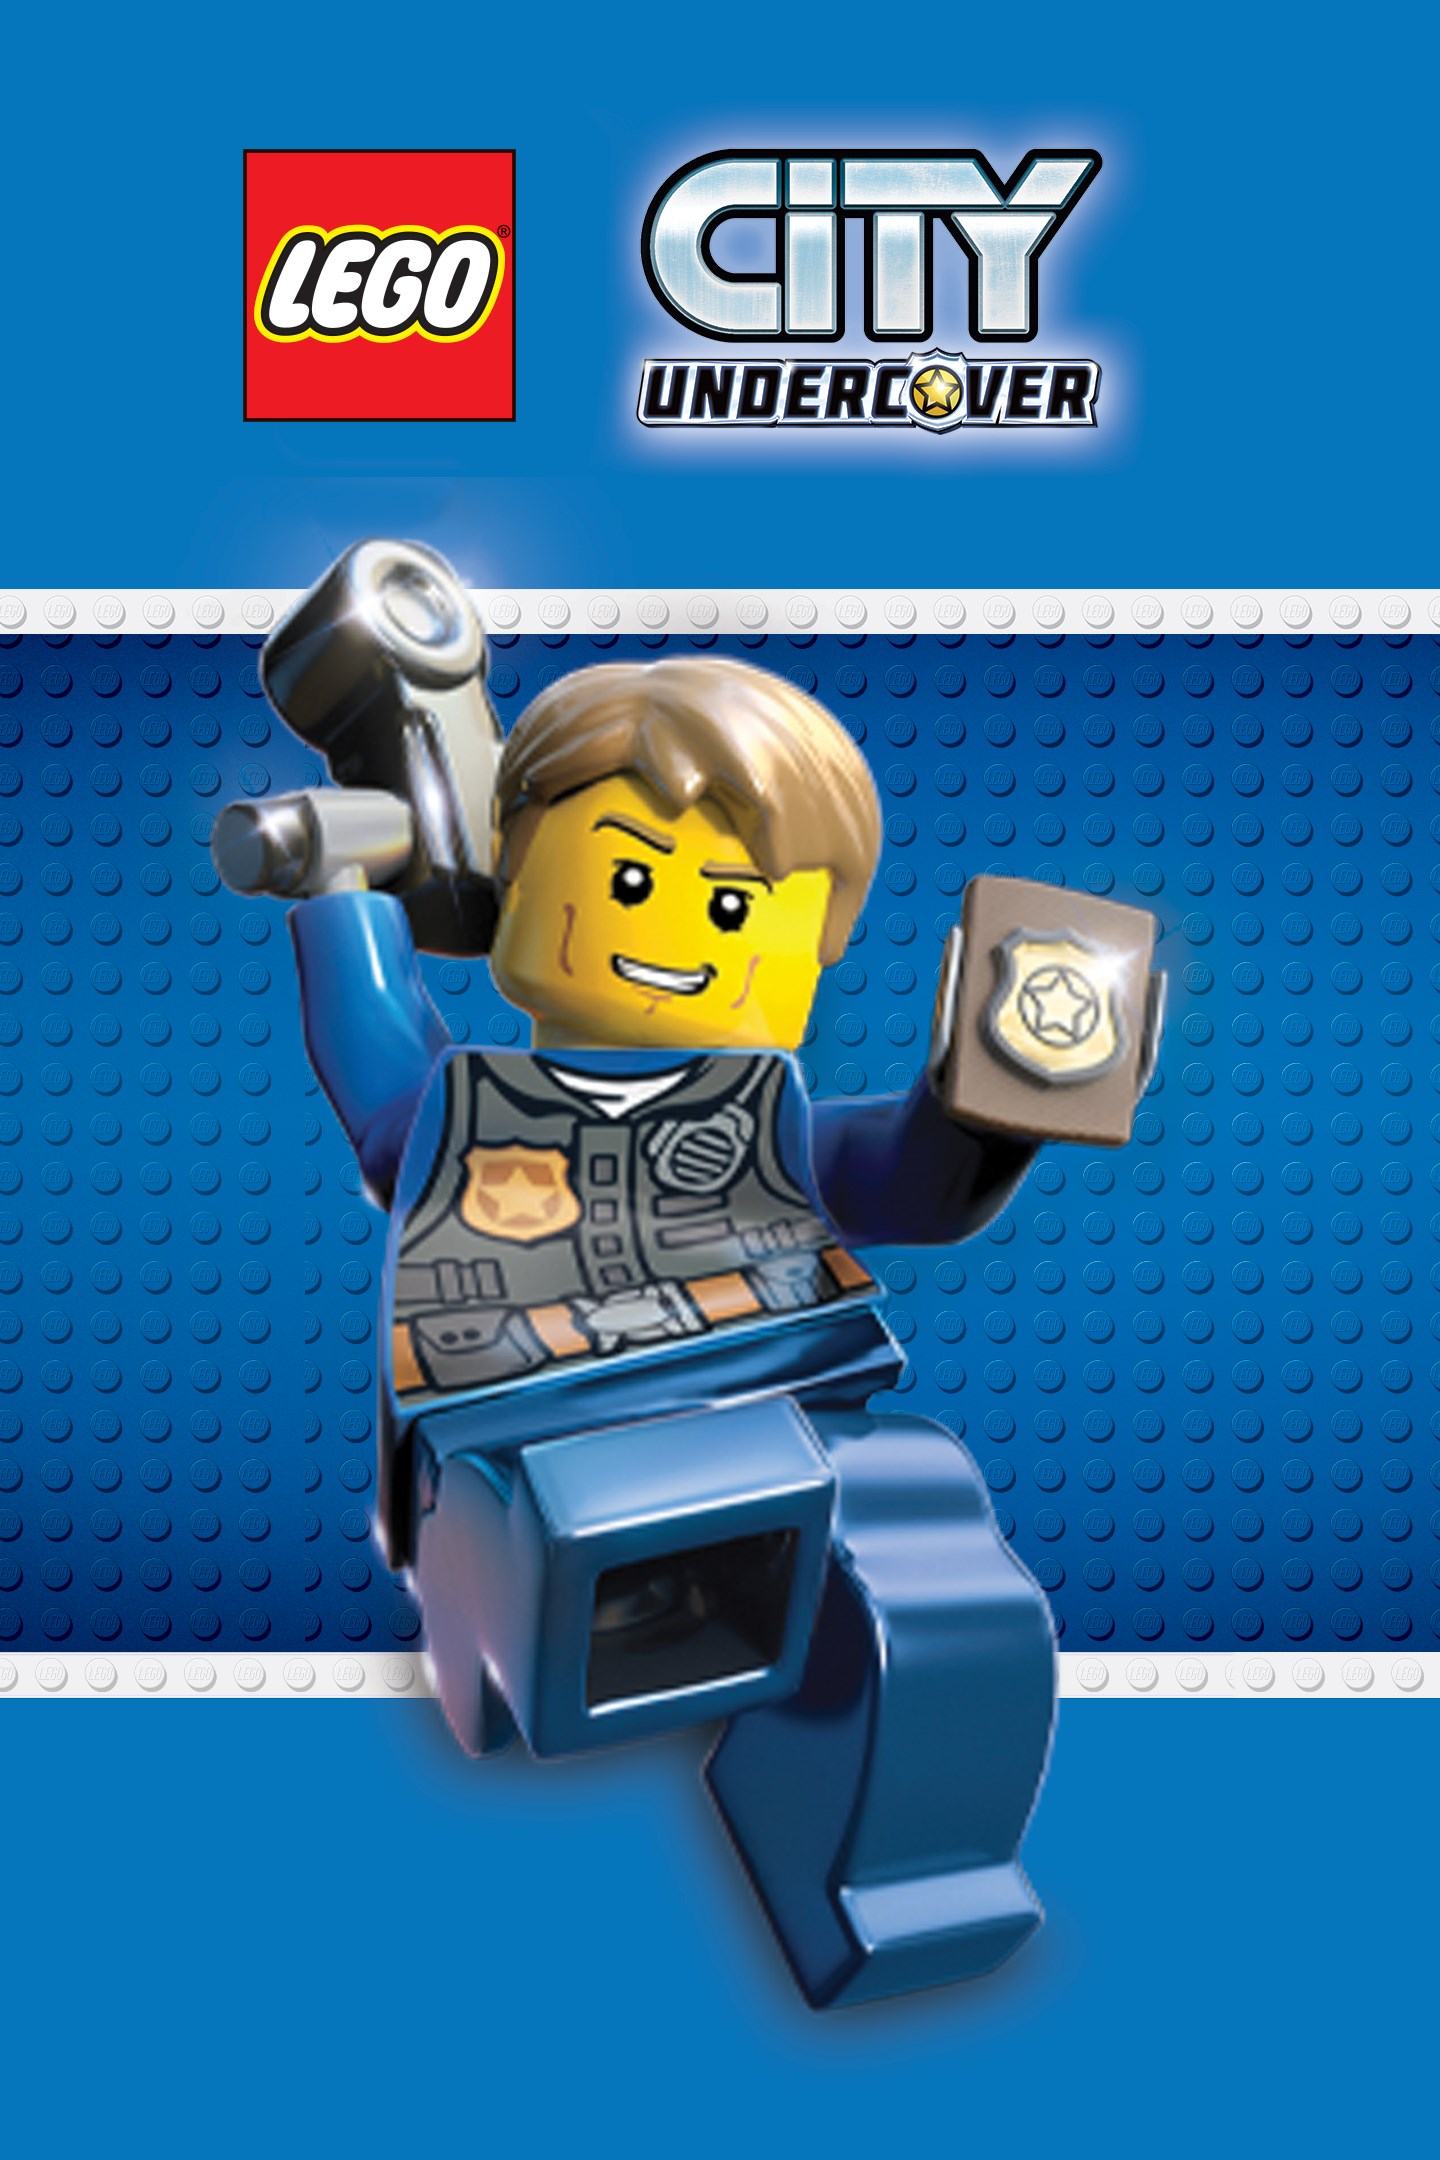 LEGO CITY Undercover Switch $5.99